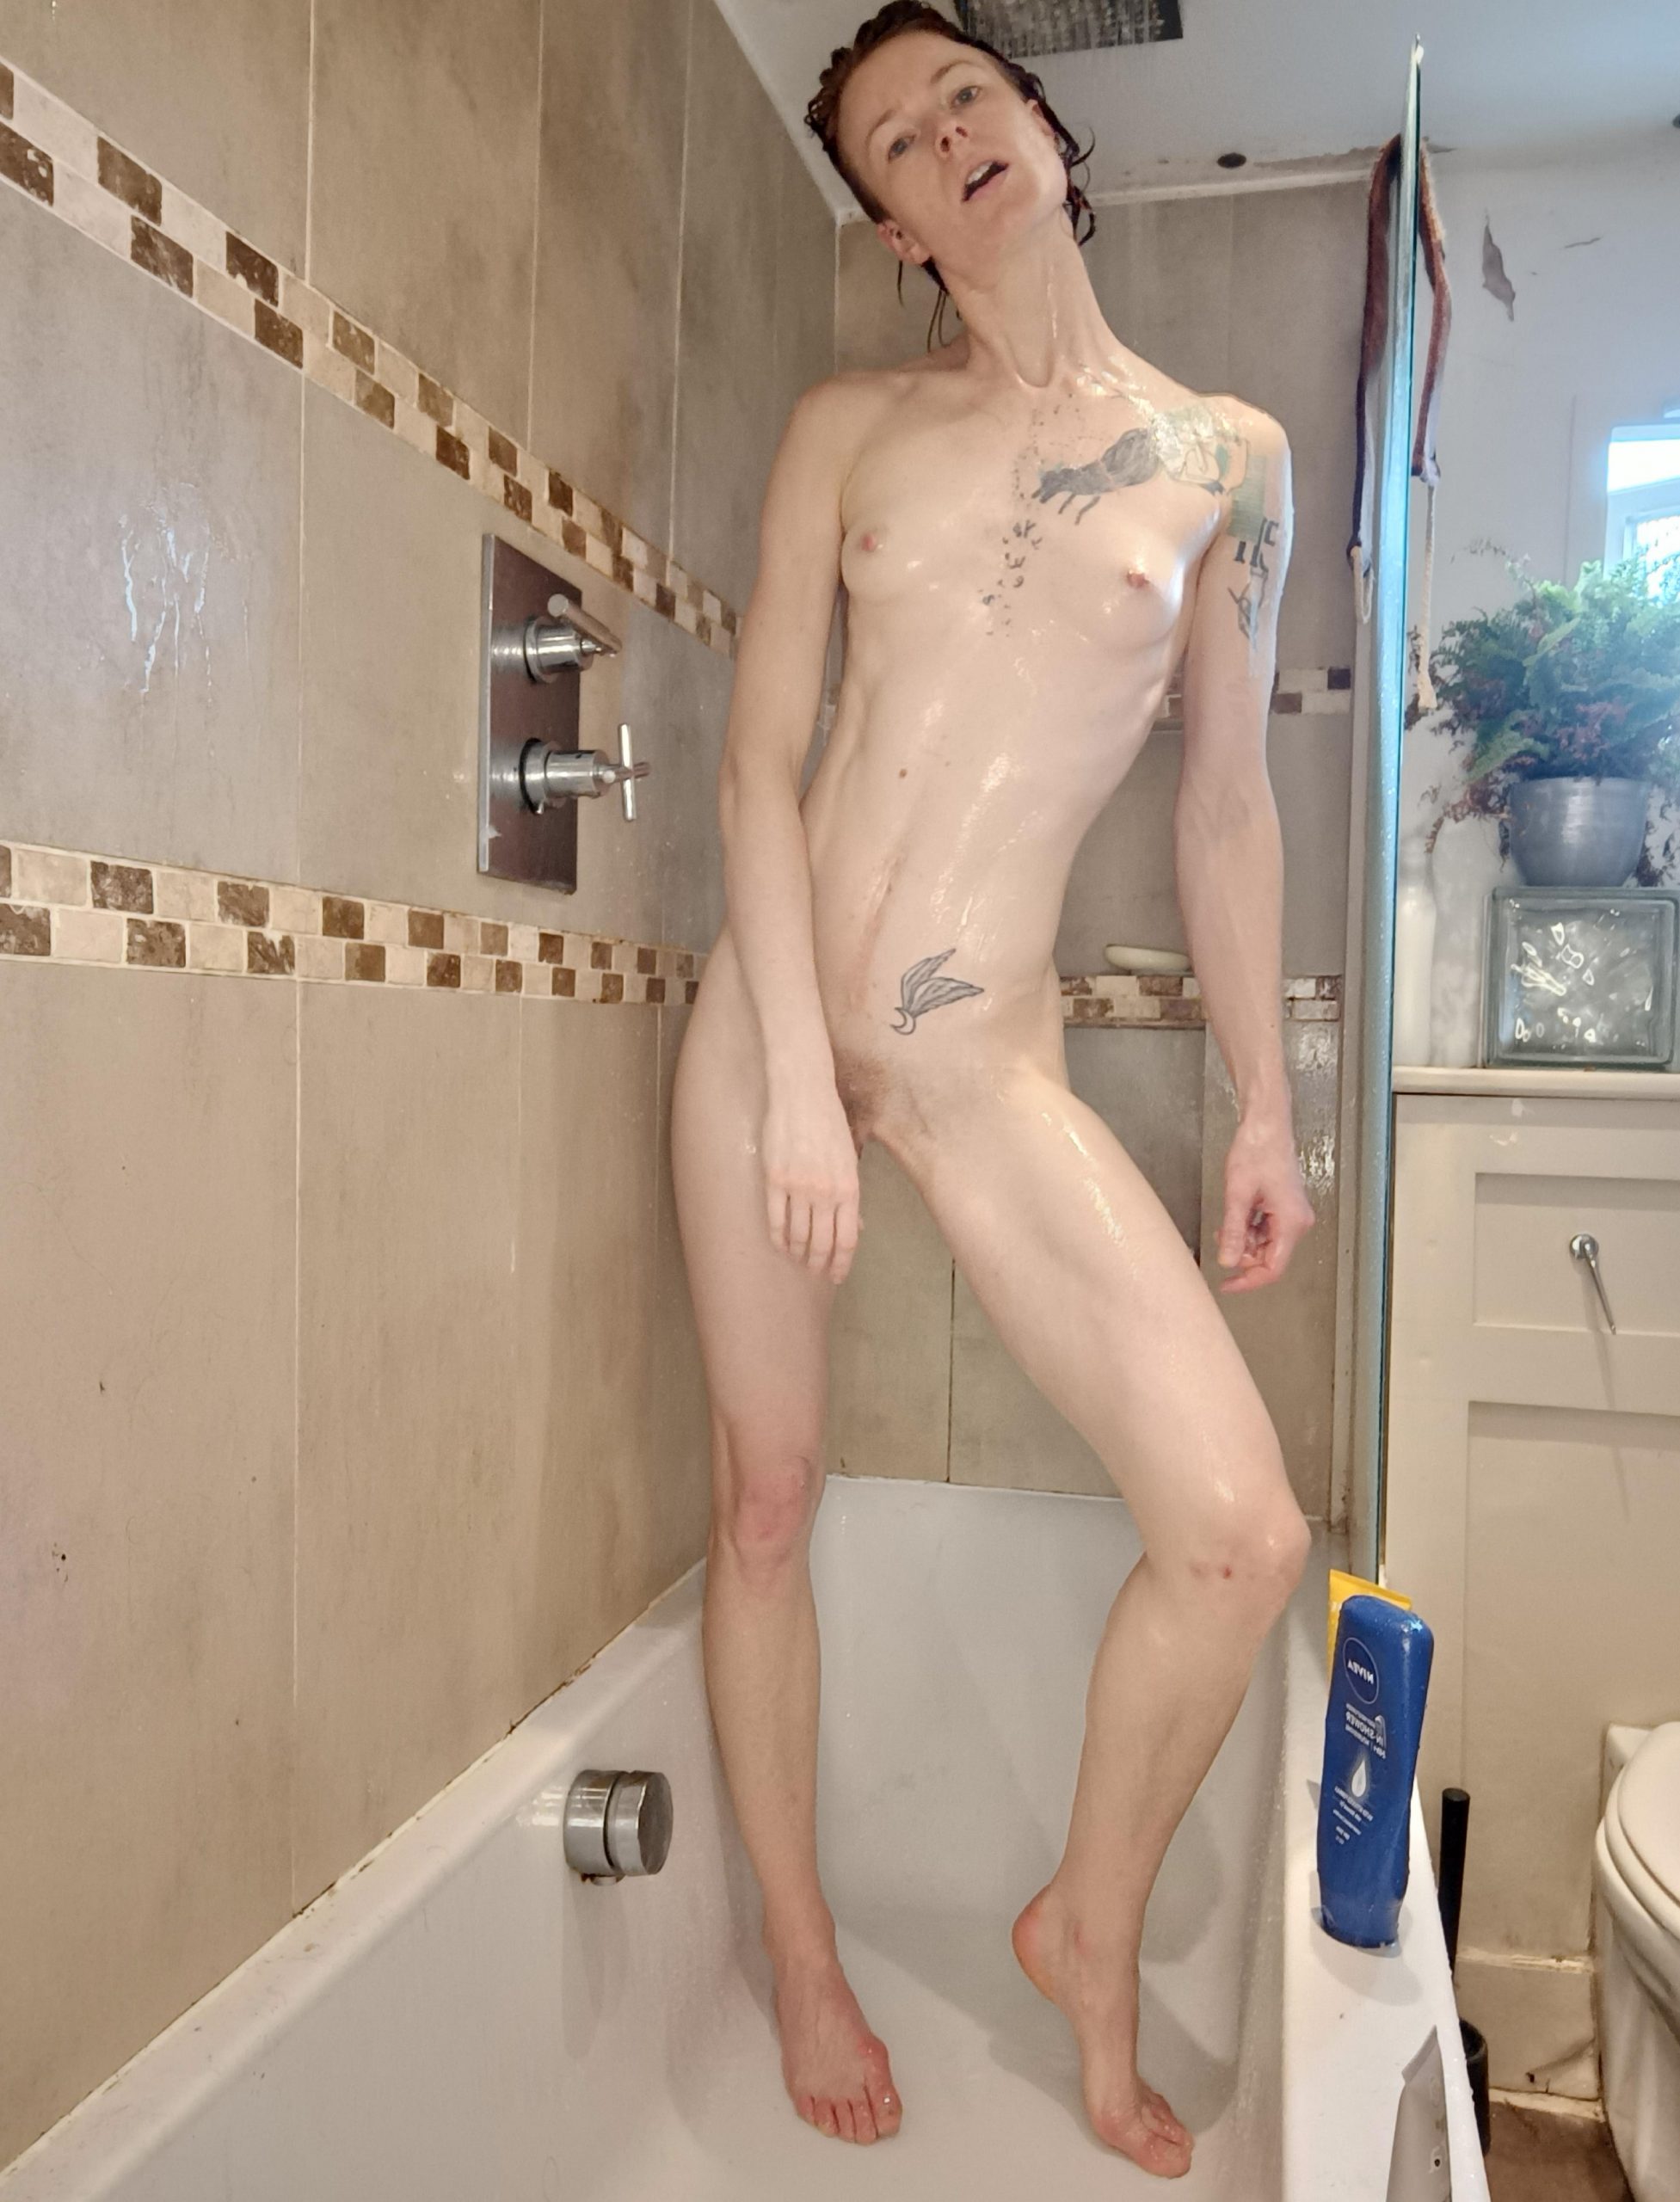 6′ Of Toned Muscle Is Waiting For You In The Shower